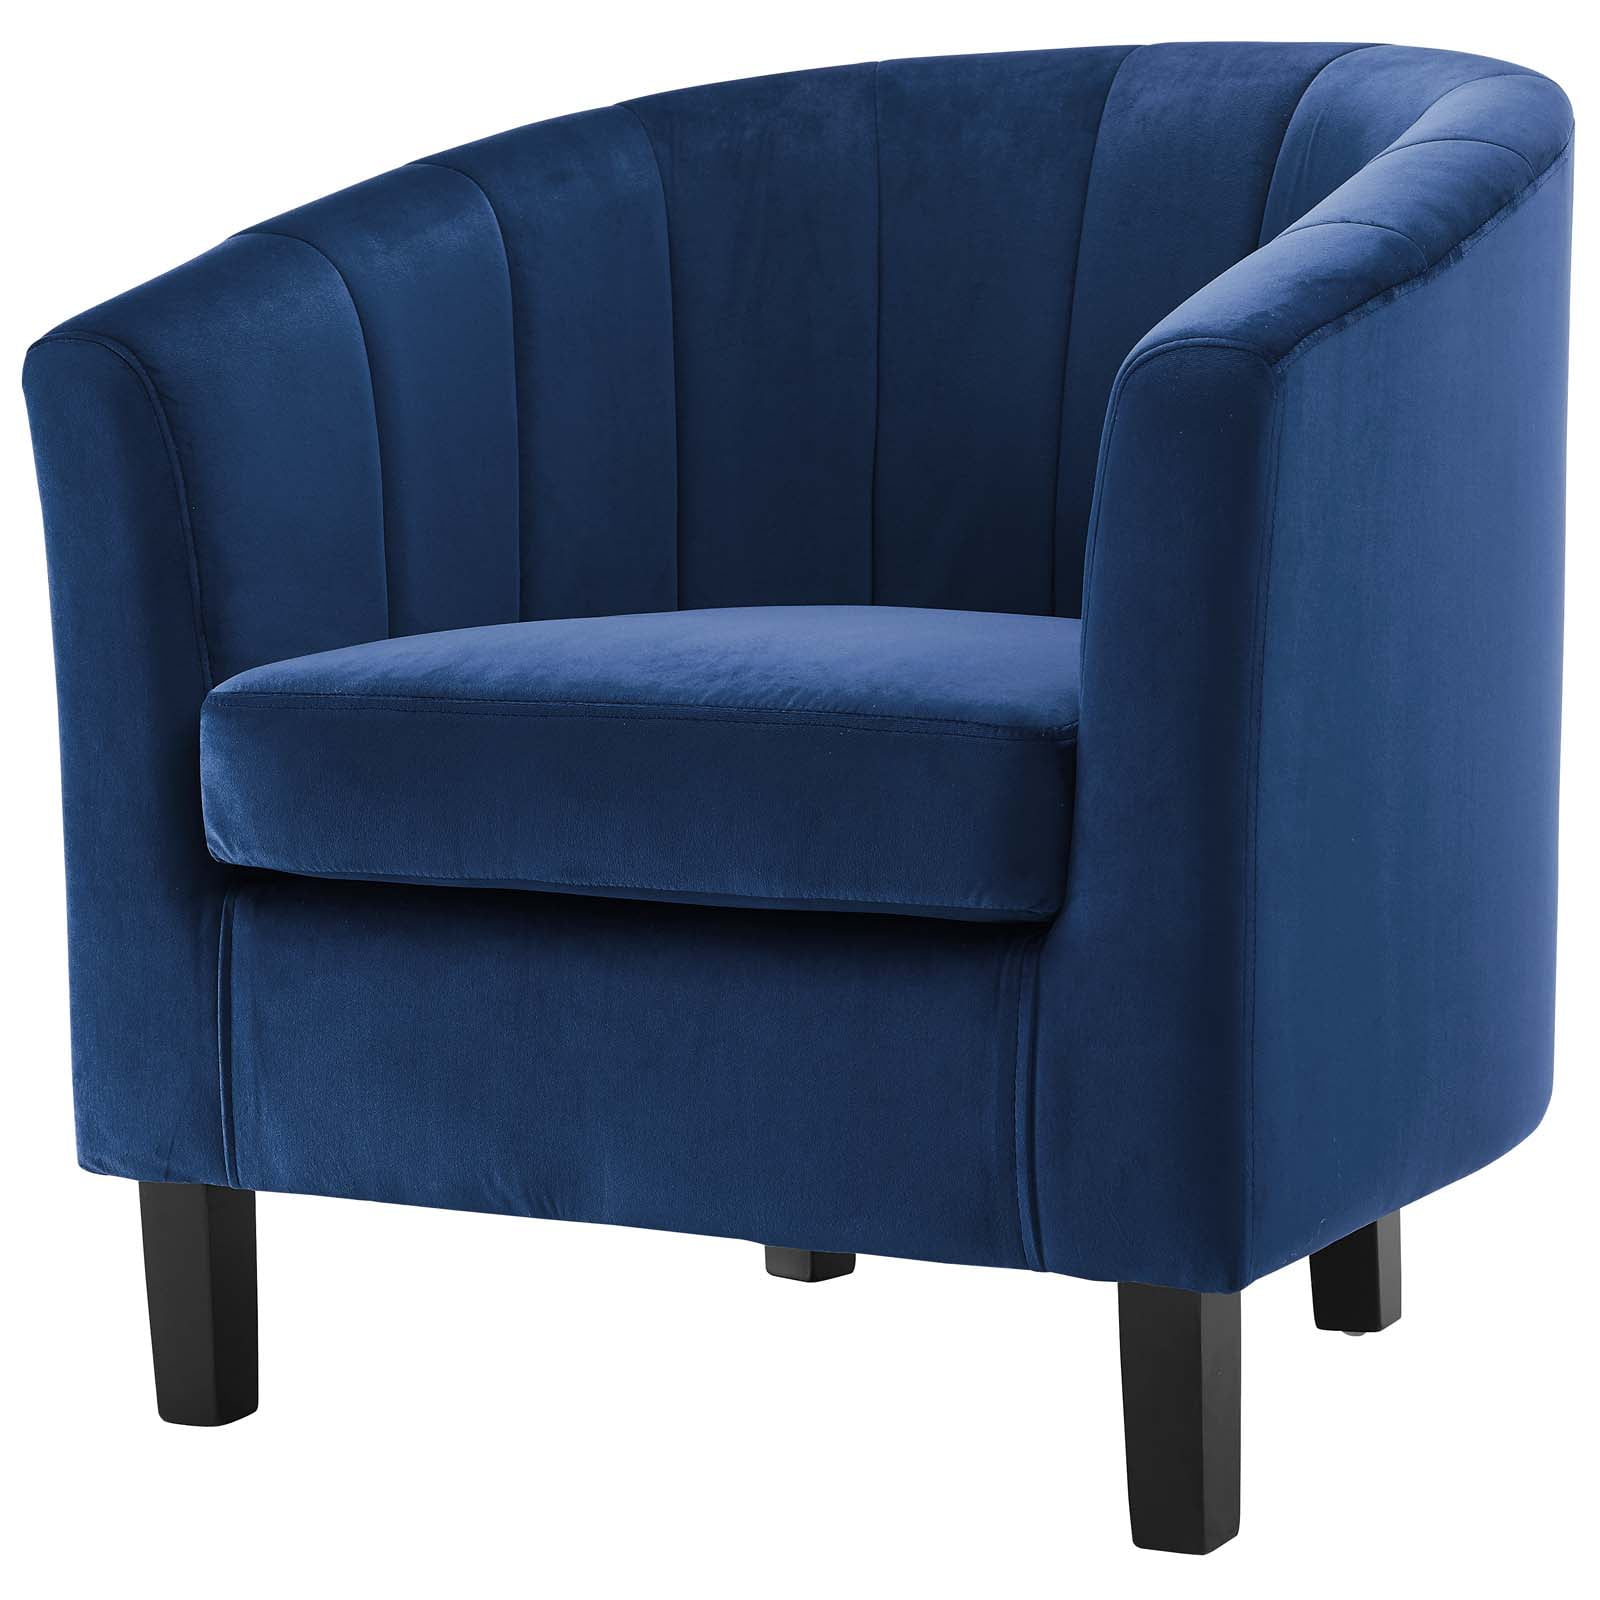 Modern Contemporary Urban Design Living Room Lounge Club Lobby Tufted Armchair Accent Chair